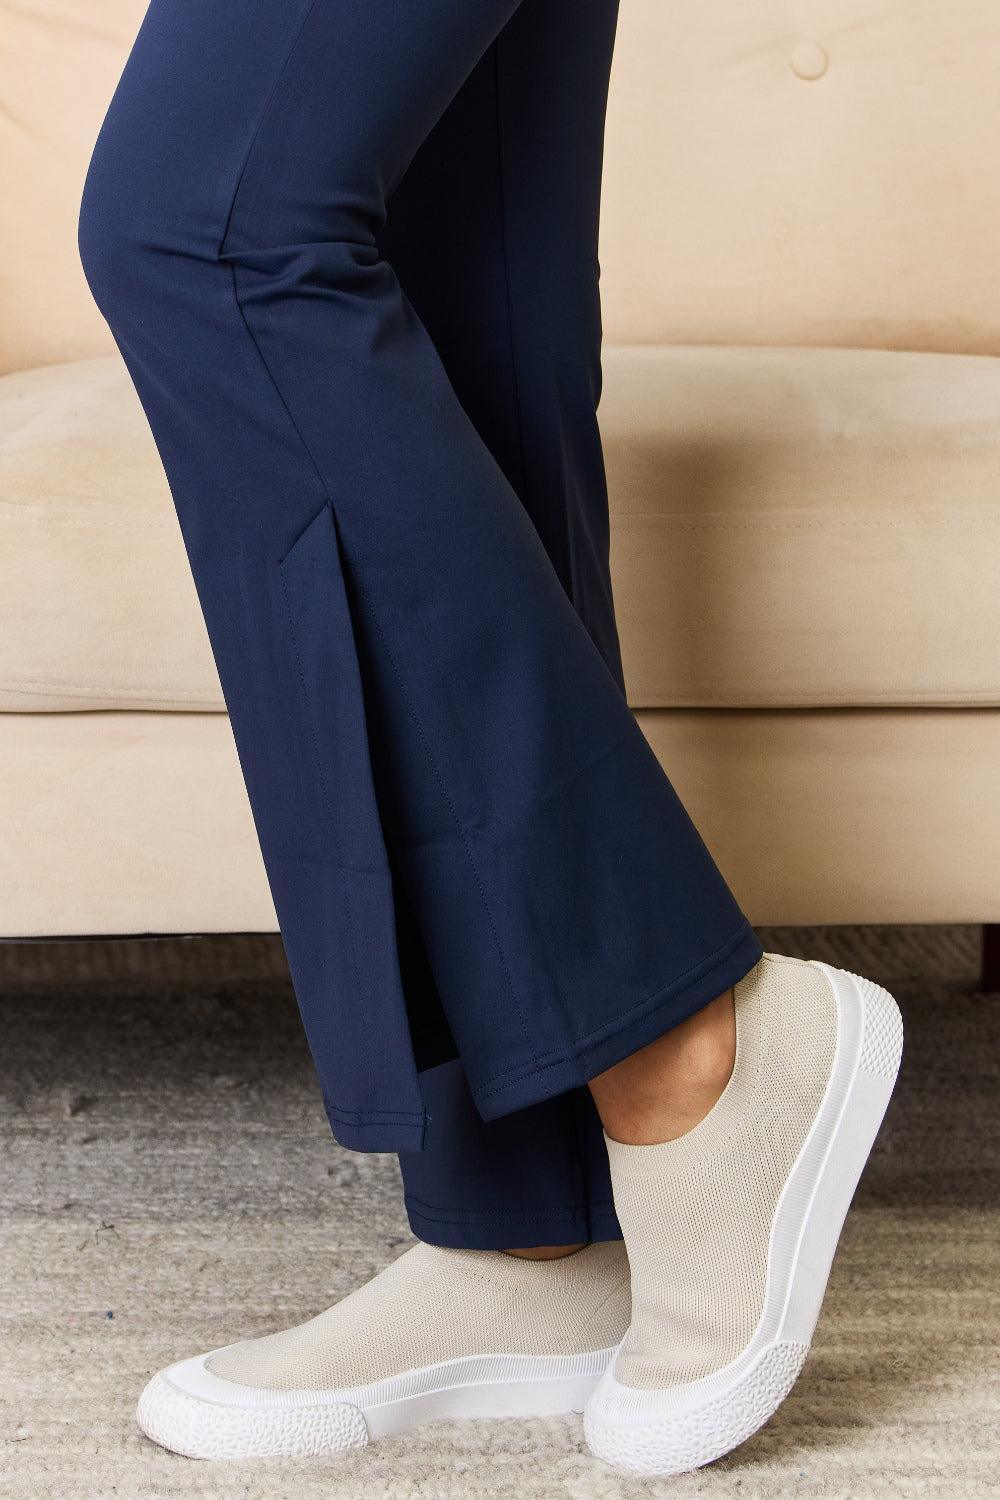 a woman in blue pants and white sneakers